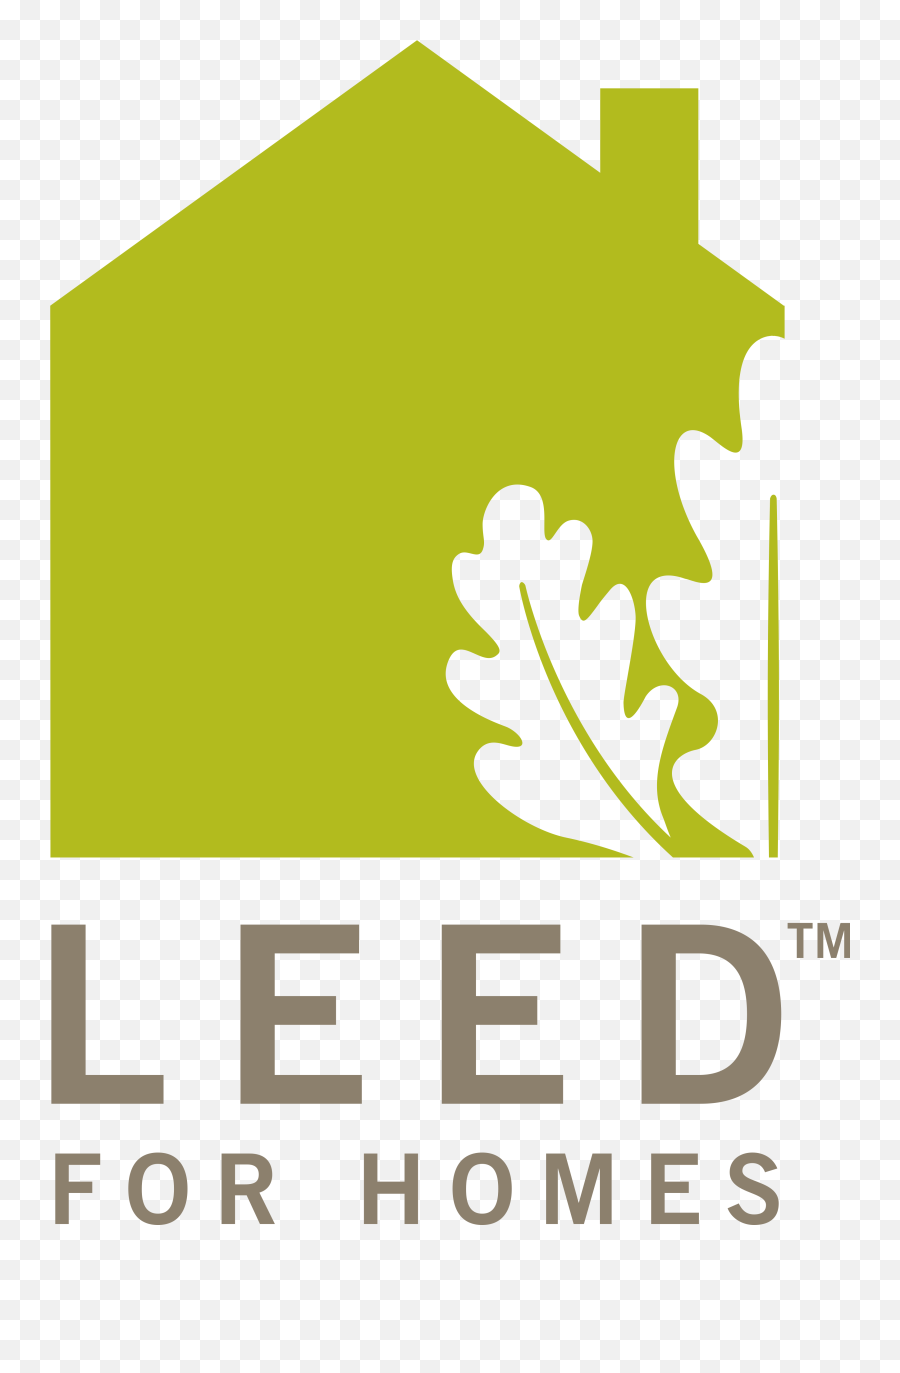 Us Green Building Council U2013 Logos Download - Graphic Design Png,Need For Speed Logos